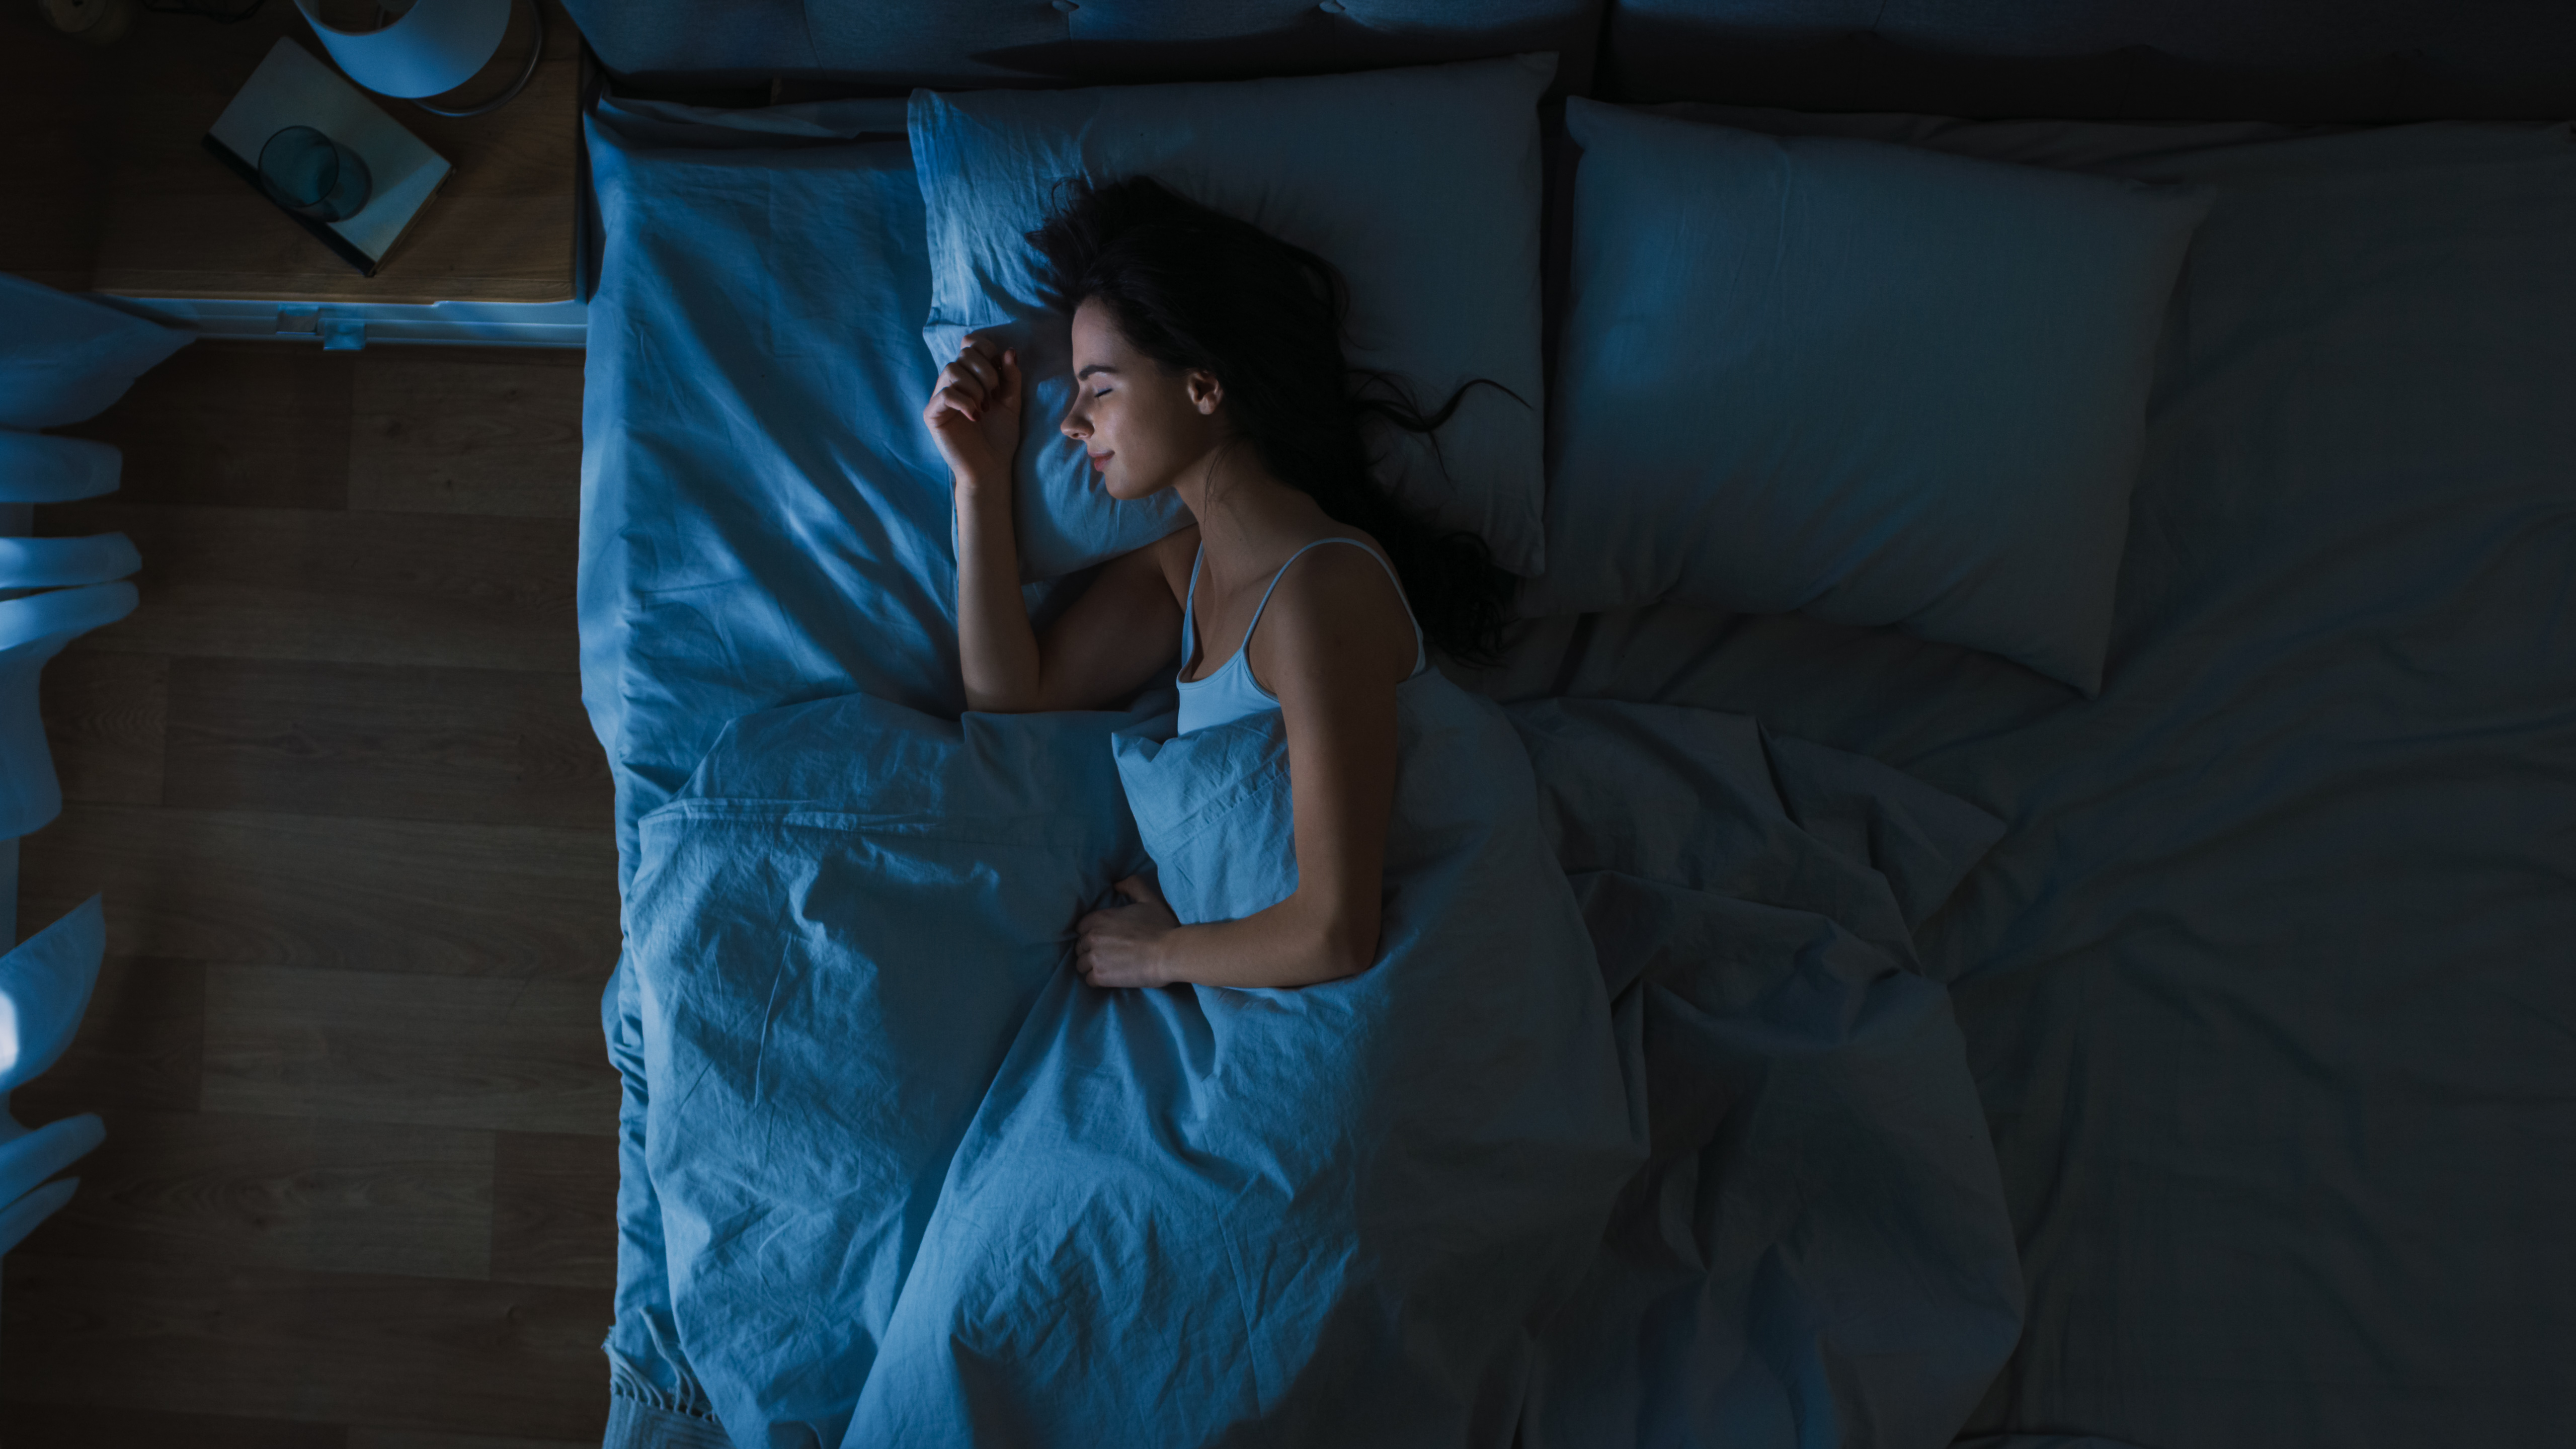 In a 2015 study, researchers found that getting 7 hours of sleep every night can make you four times less likely to get a cold as compared to six hours of sleep.